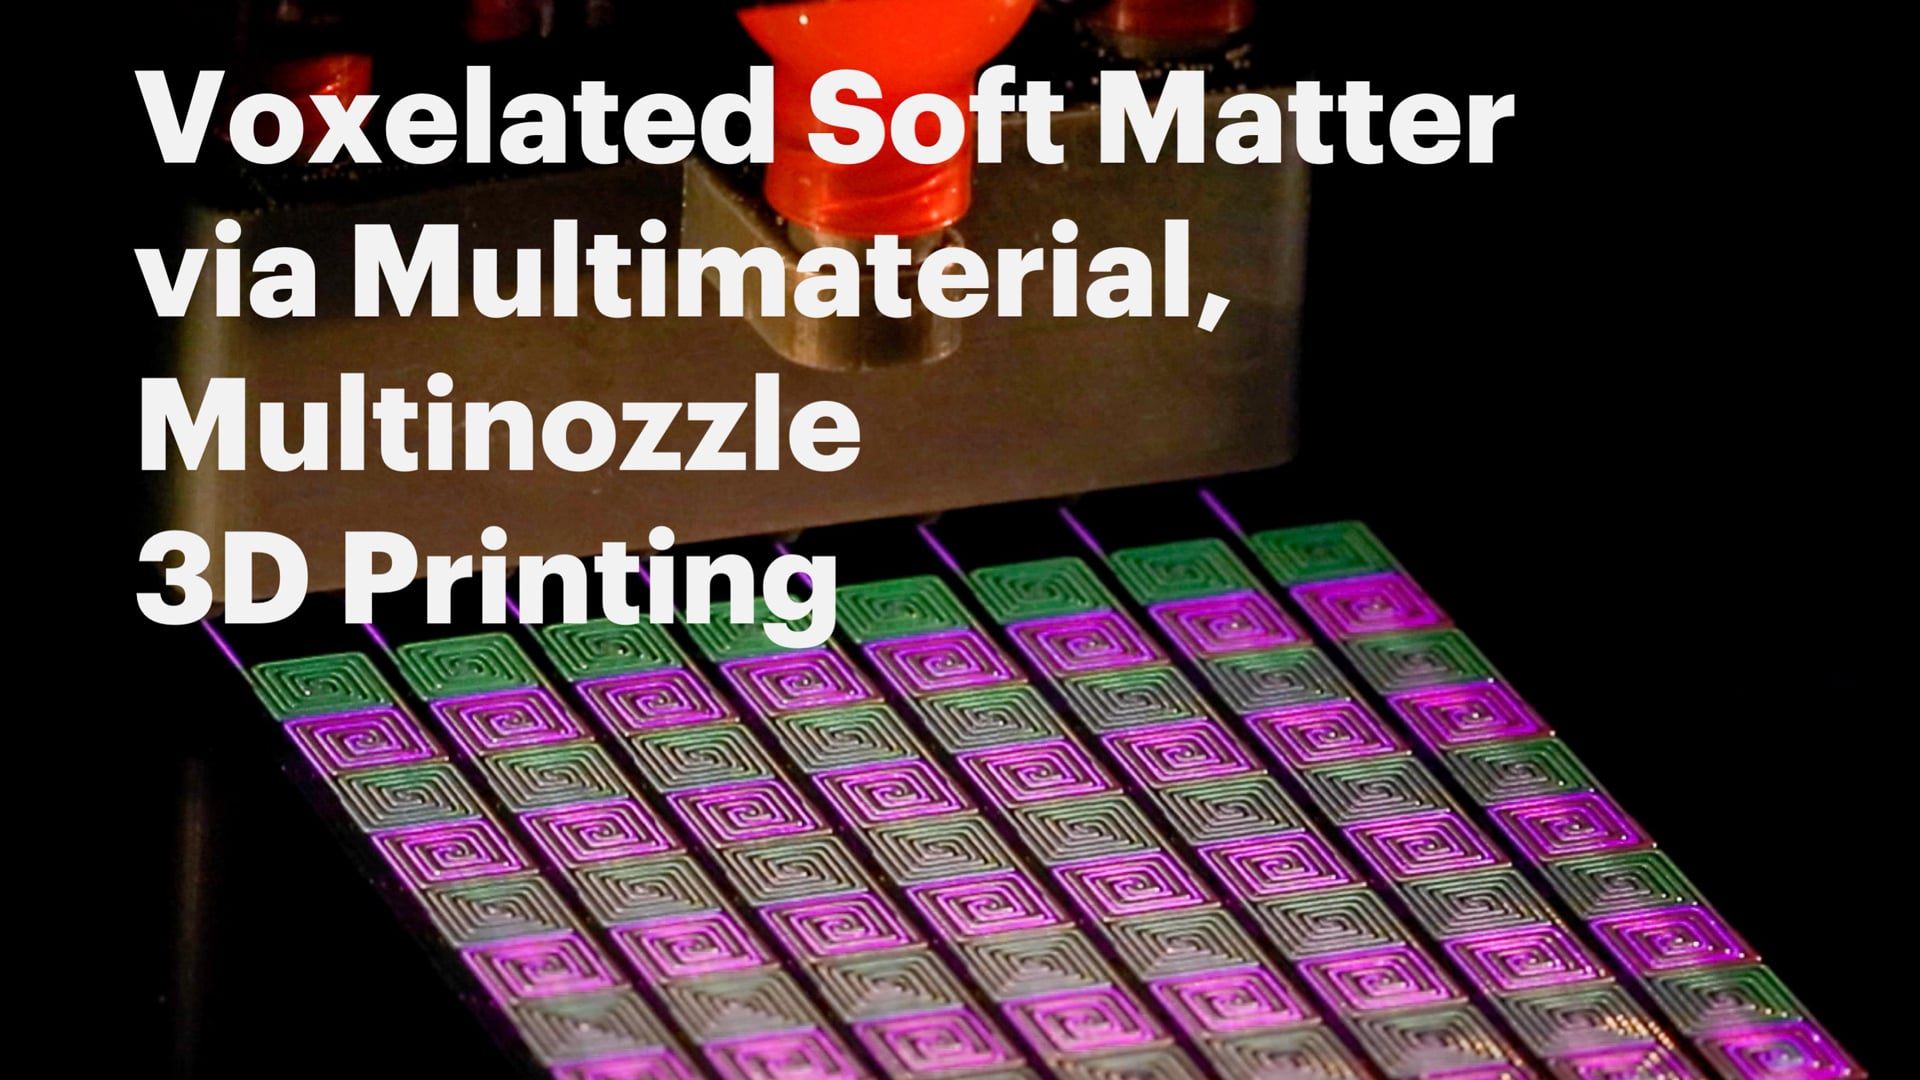 Voxelated Soft Matter via Multimaterial, Multinozzle 3D Printing